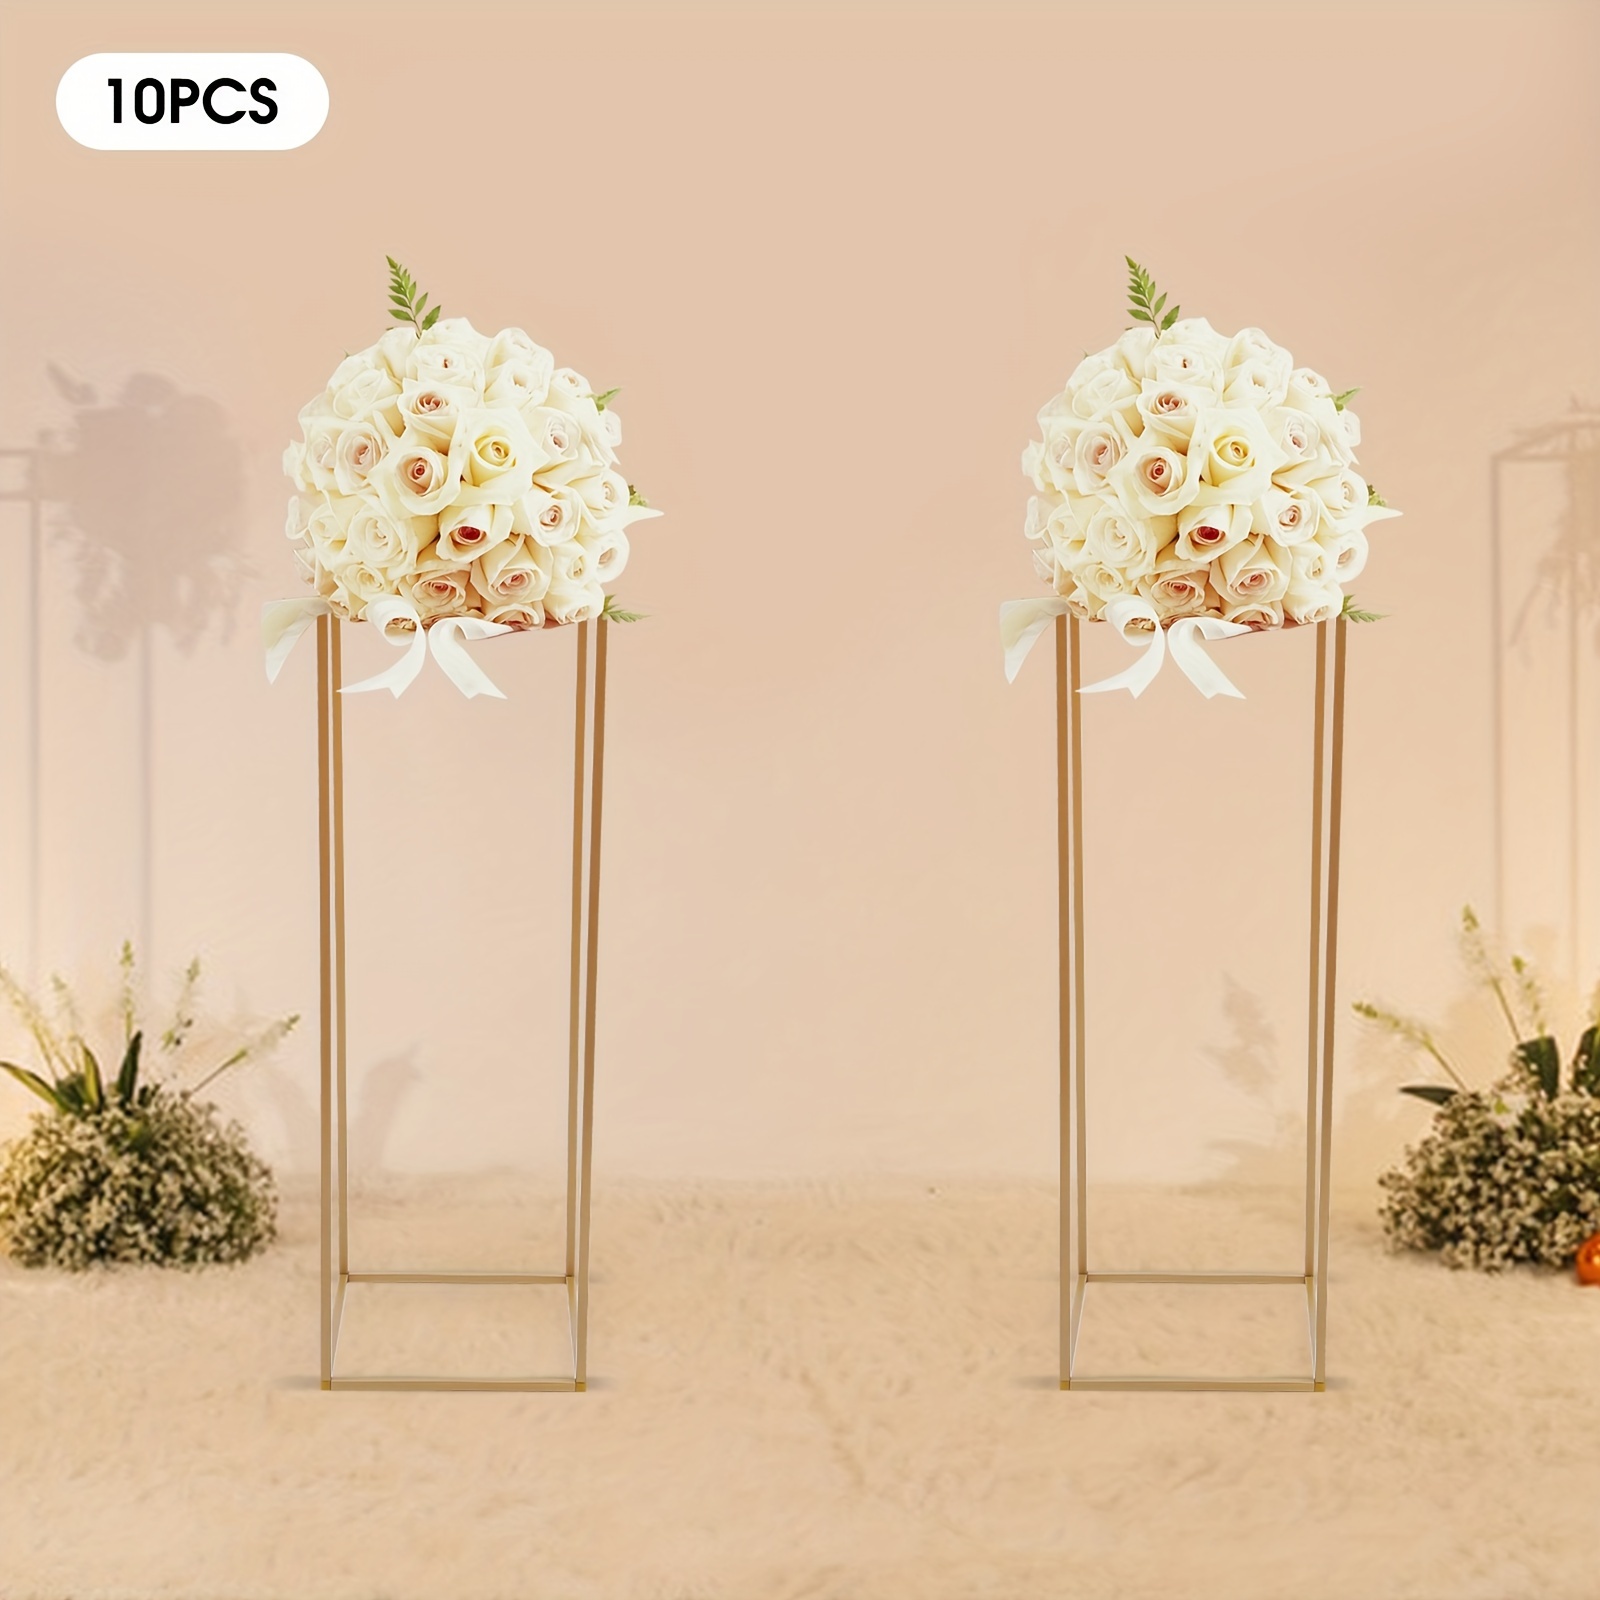 

10pcs Tall Gold Metal Flower Stand For Wedding Table Centerpieces Decor Usa